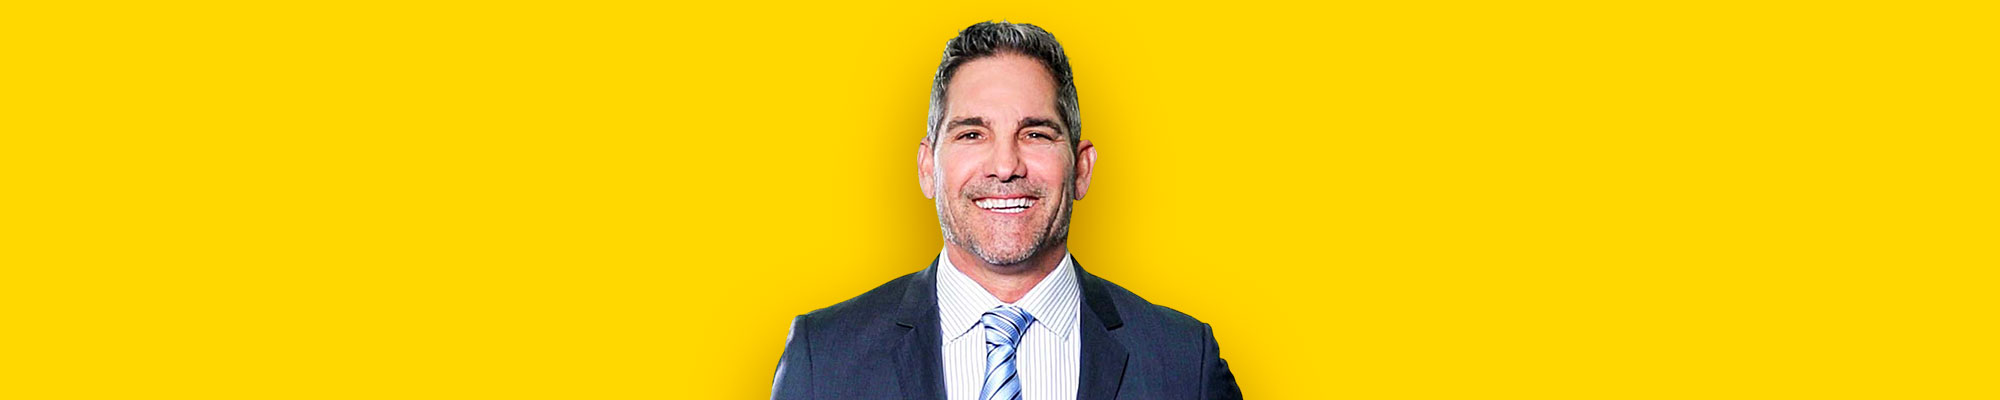 Grant Cardone: How To Create Wealth